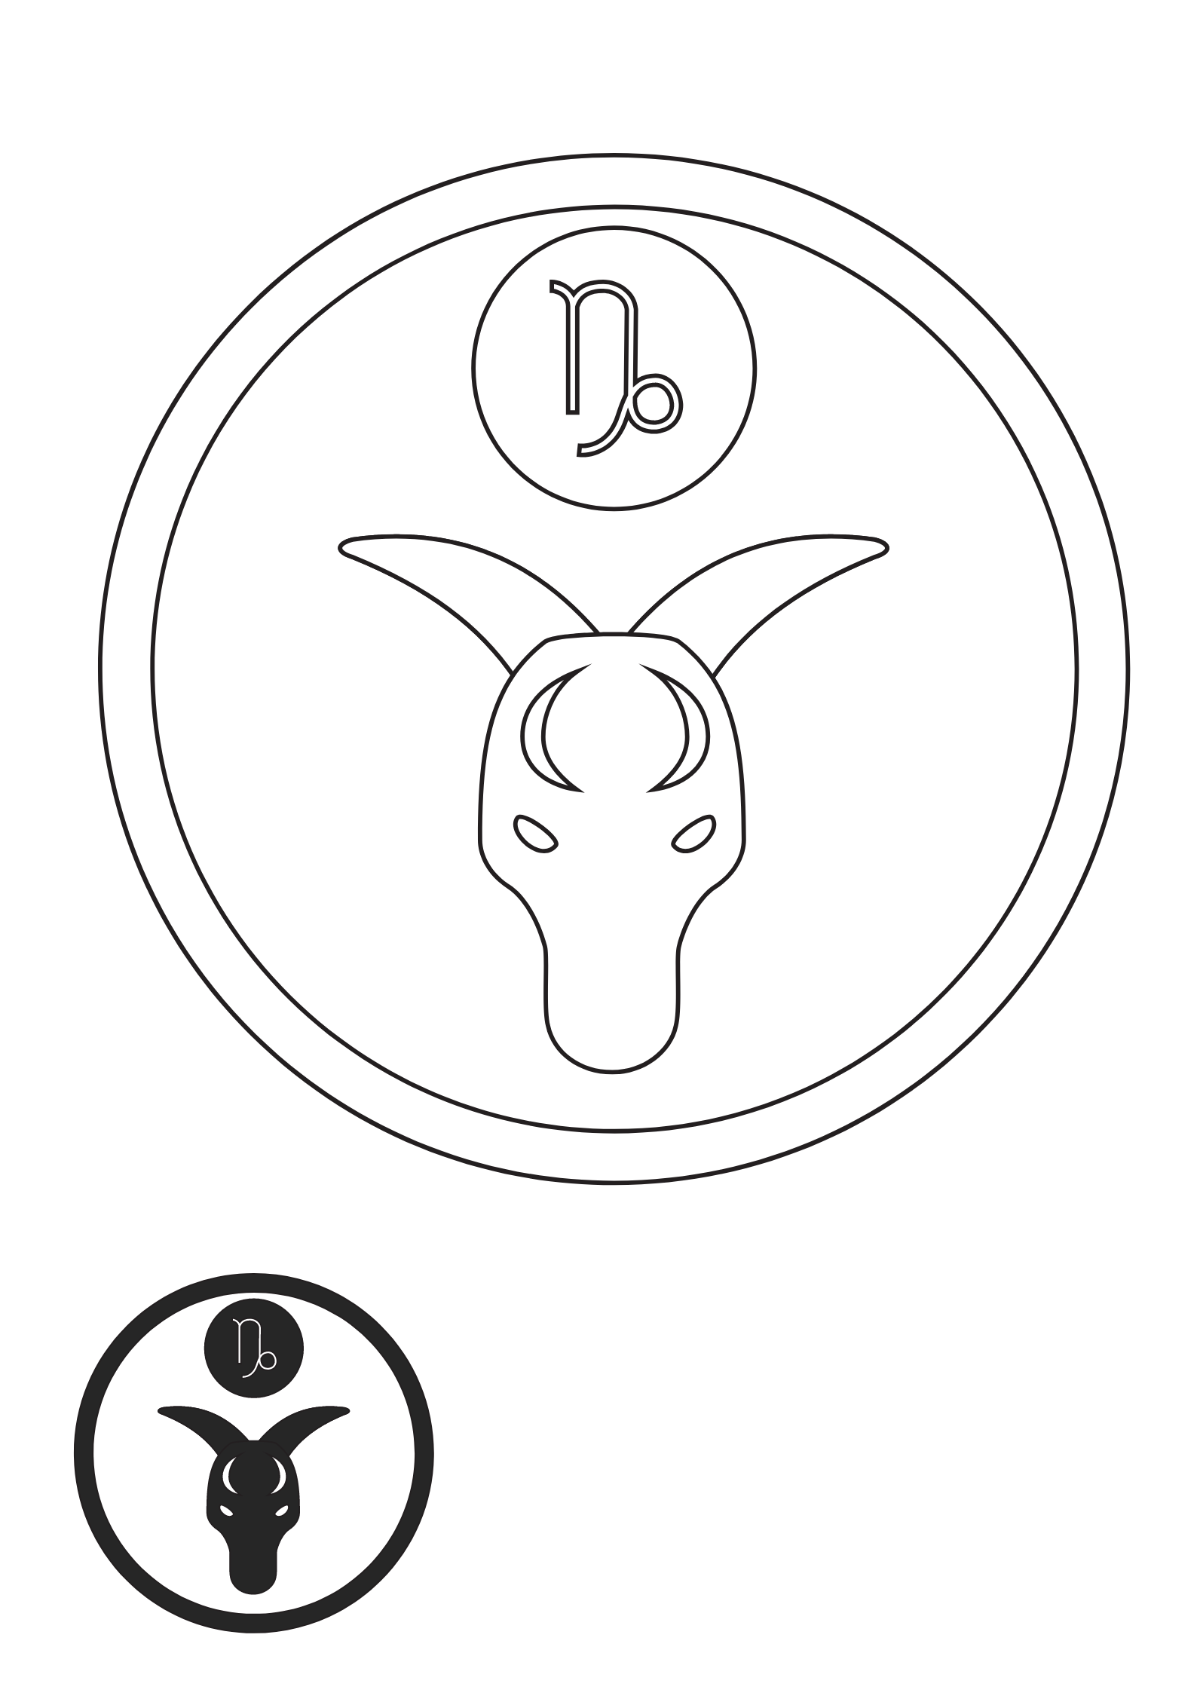 Black And White Capricorn coloring page